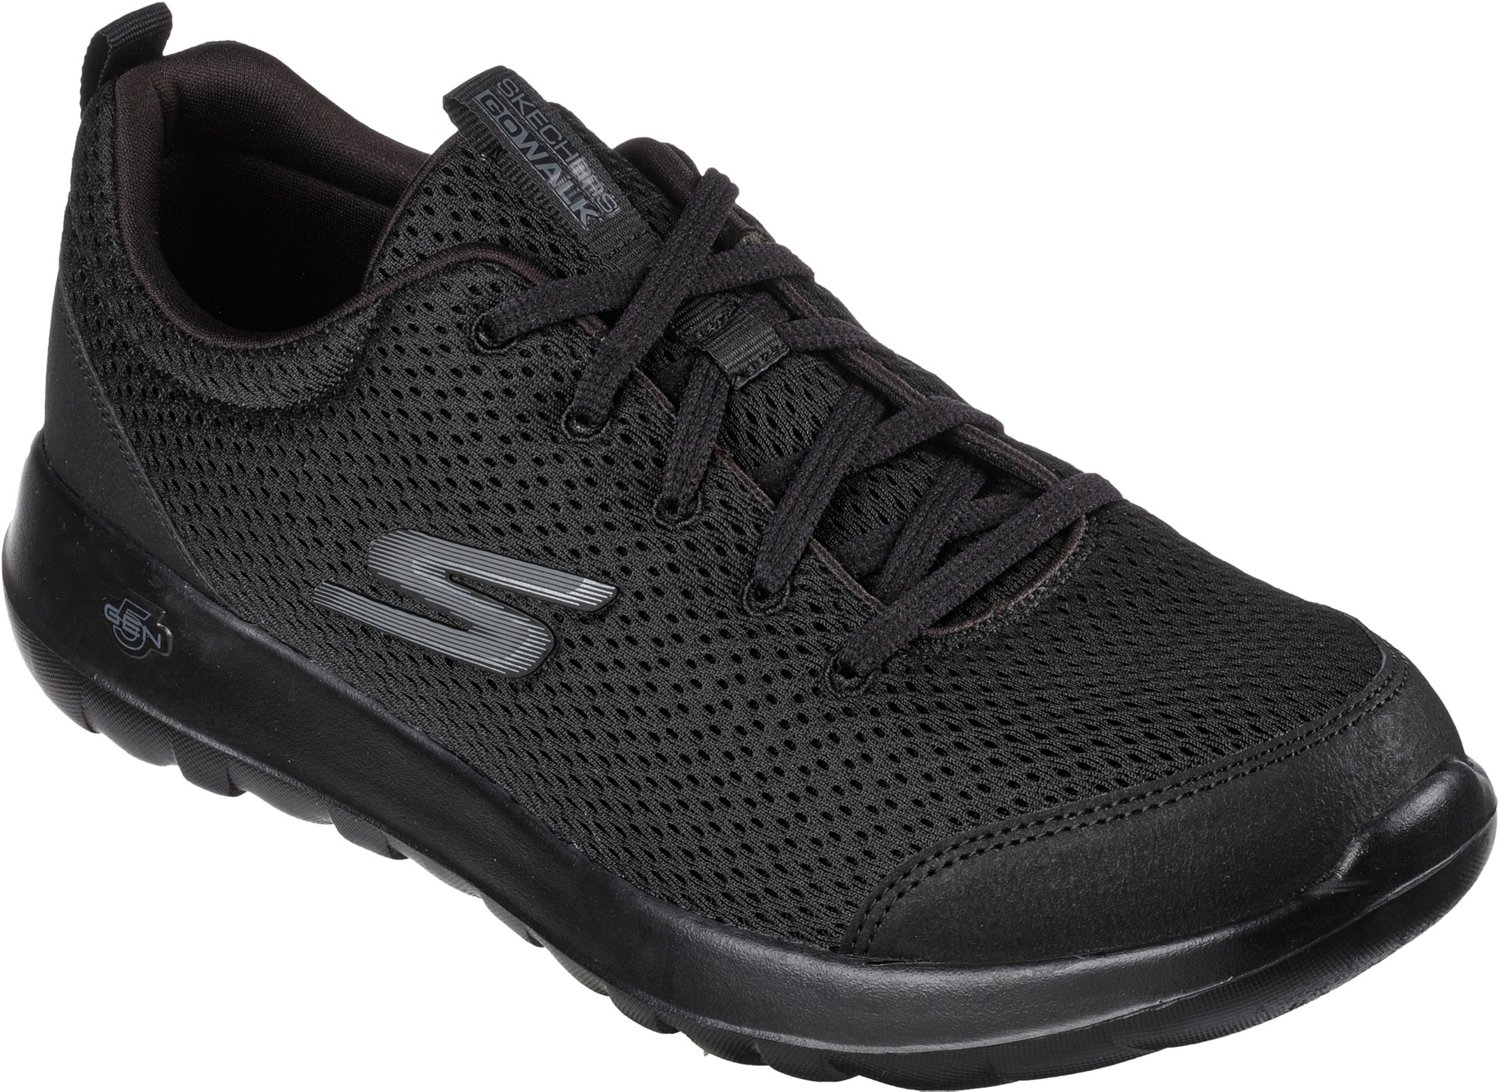 SKECHERS Men's Go Walk Max Shoes | Free Shipping at Academy